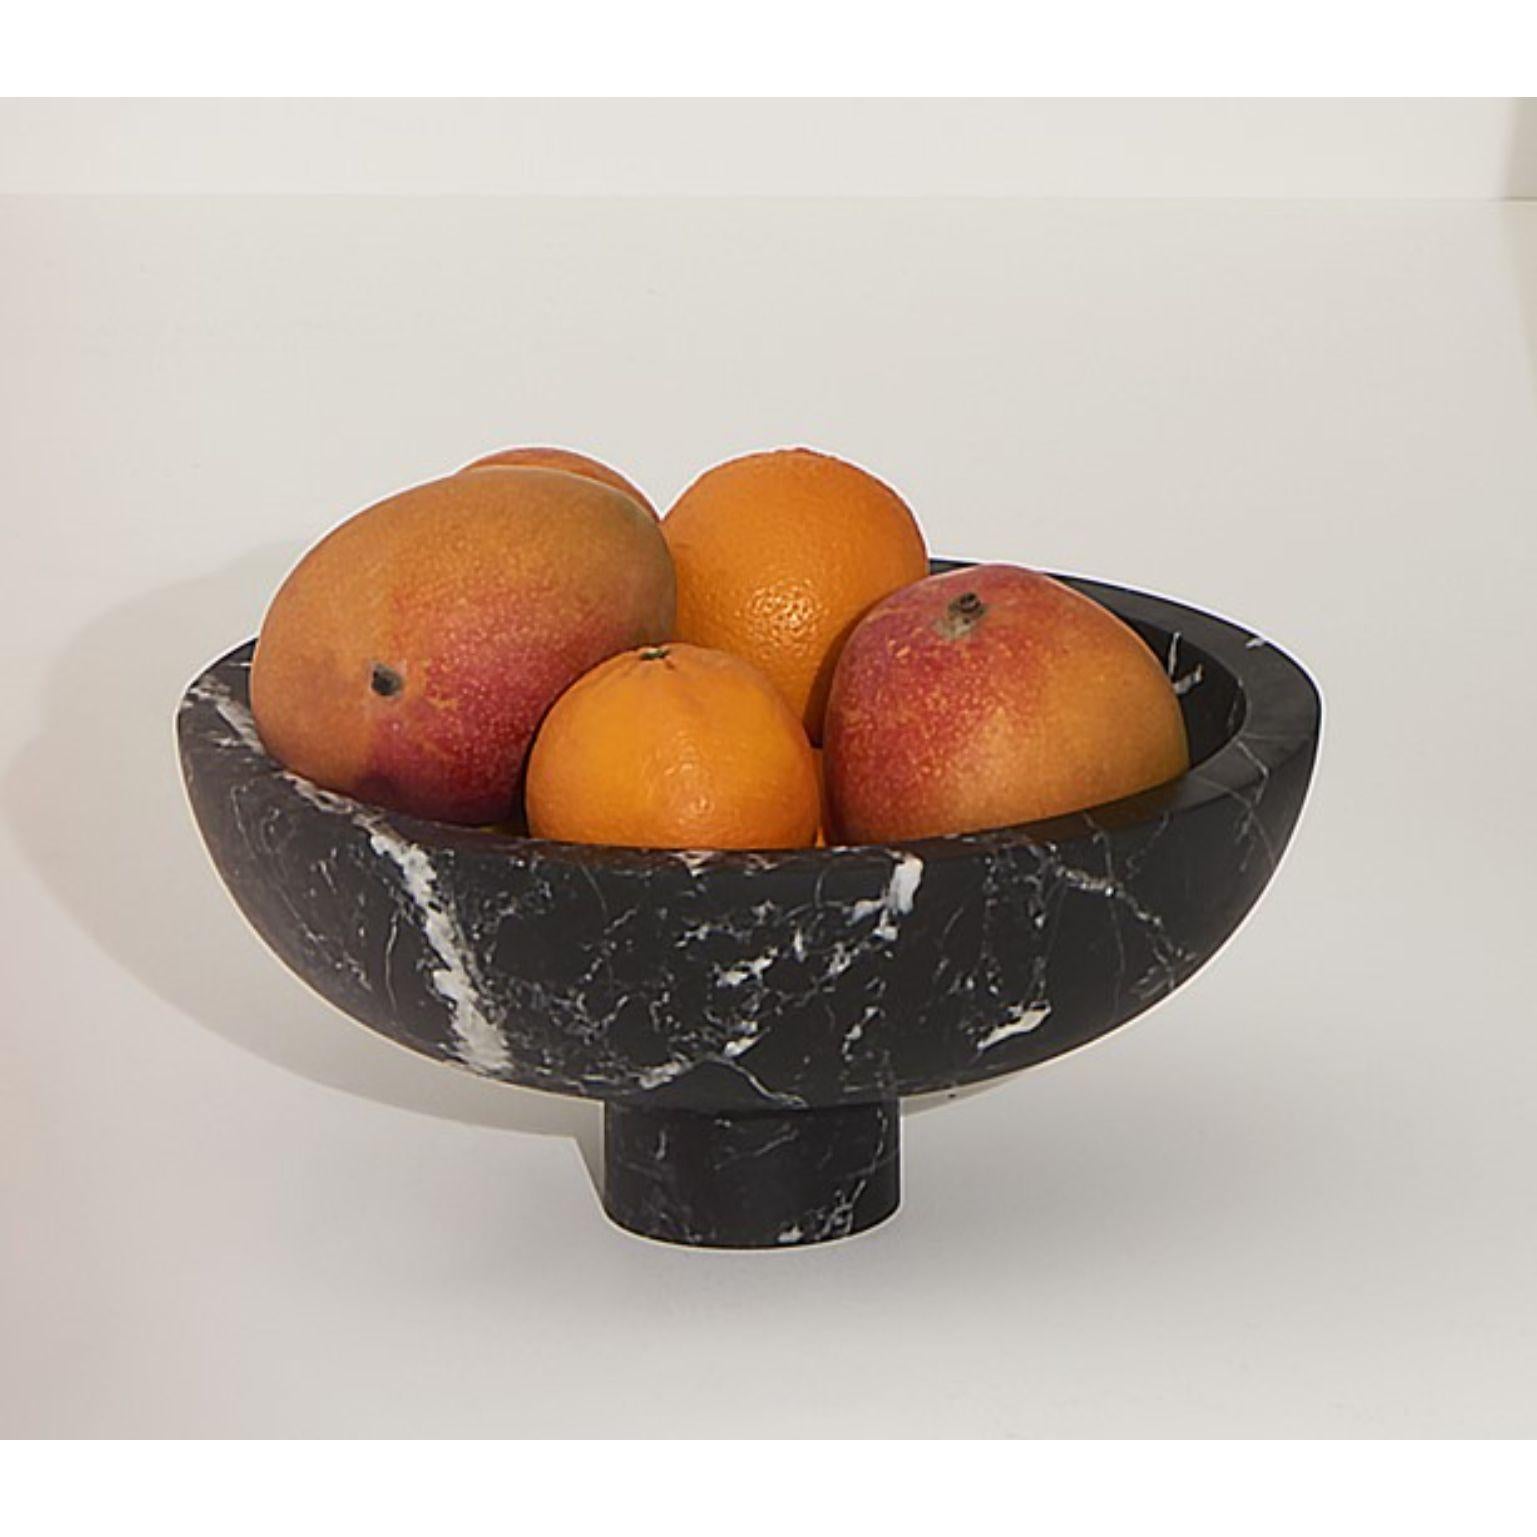 inside out bowl by Karen Chekerdjian
Dimensions: 31 x 14 cm
Materials: Rosso Levanto

Also available: Red, black, tobacco brown marbles

The value of change in a simple act. Karen Chekerdjian’s creation puts design front and centre: from one